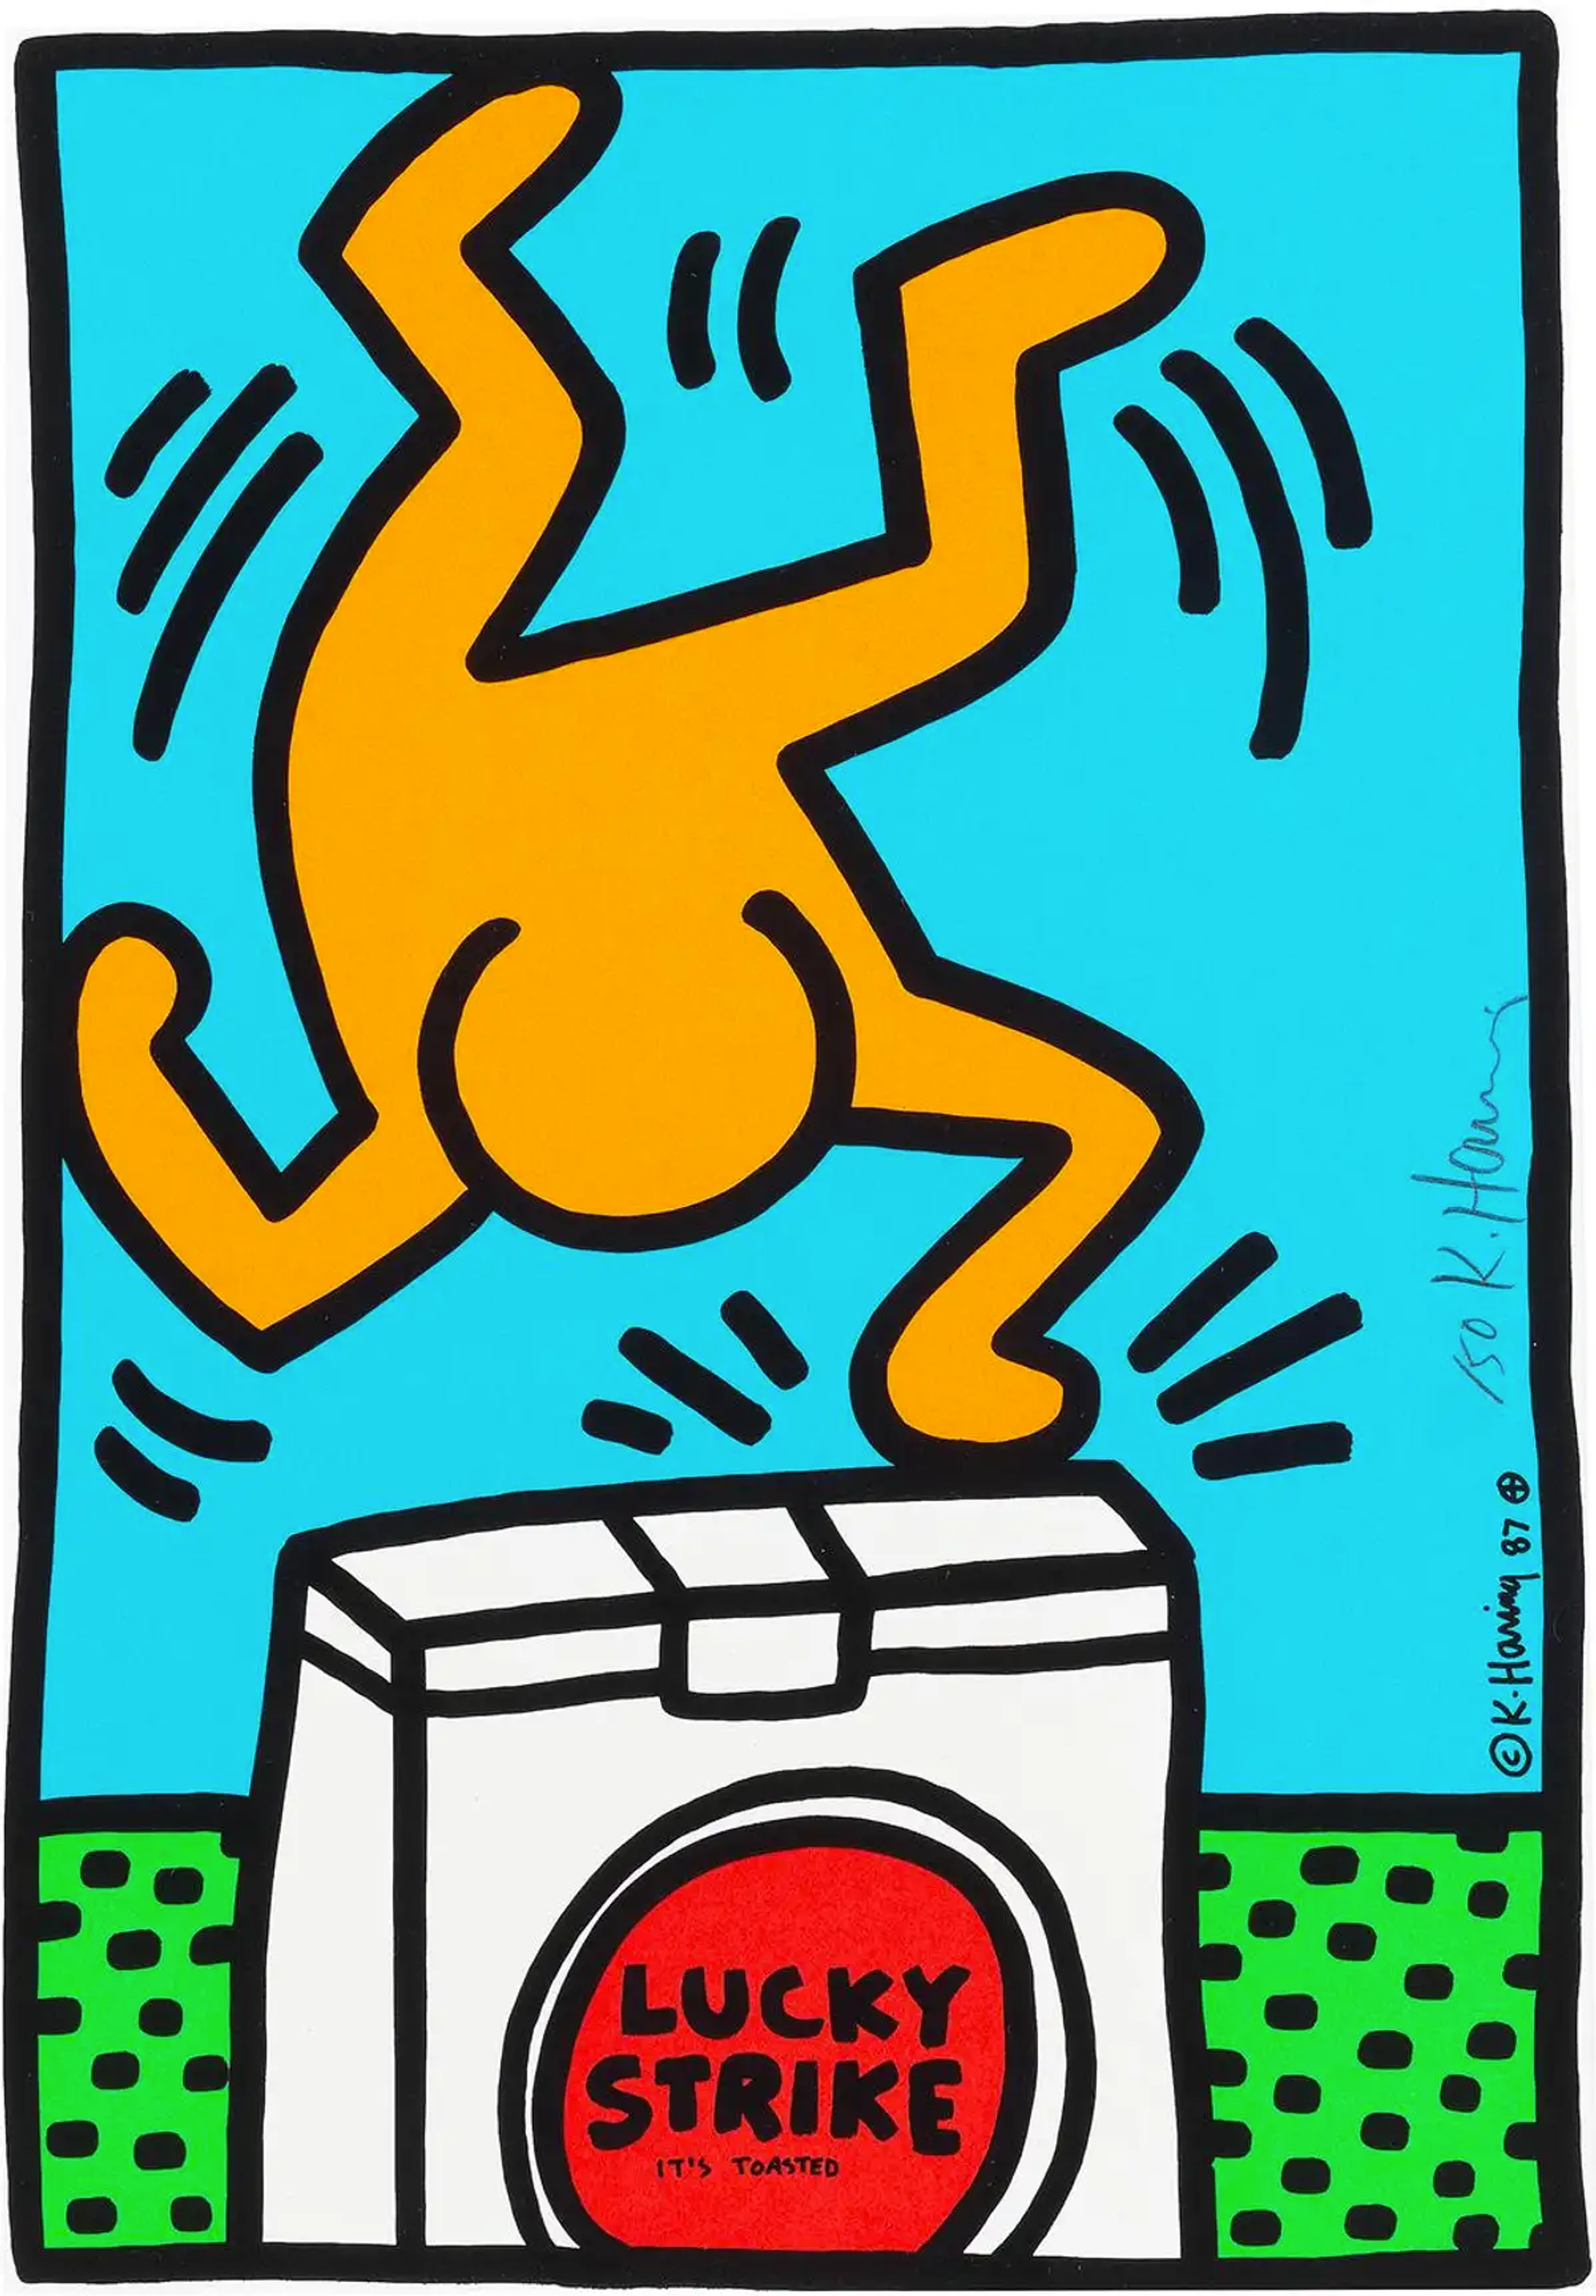 An image of a print showing a bright orange figure, upside down and in the air, Haring creates an image full of energy and excitement. The packet of Lucky Strike cigarettes remains closed, sitting at the bottom of the image as the central figure dances on top.